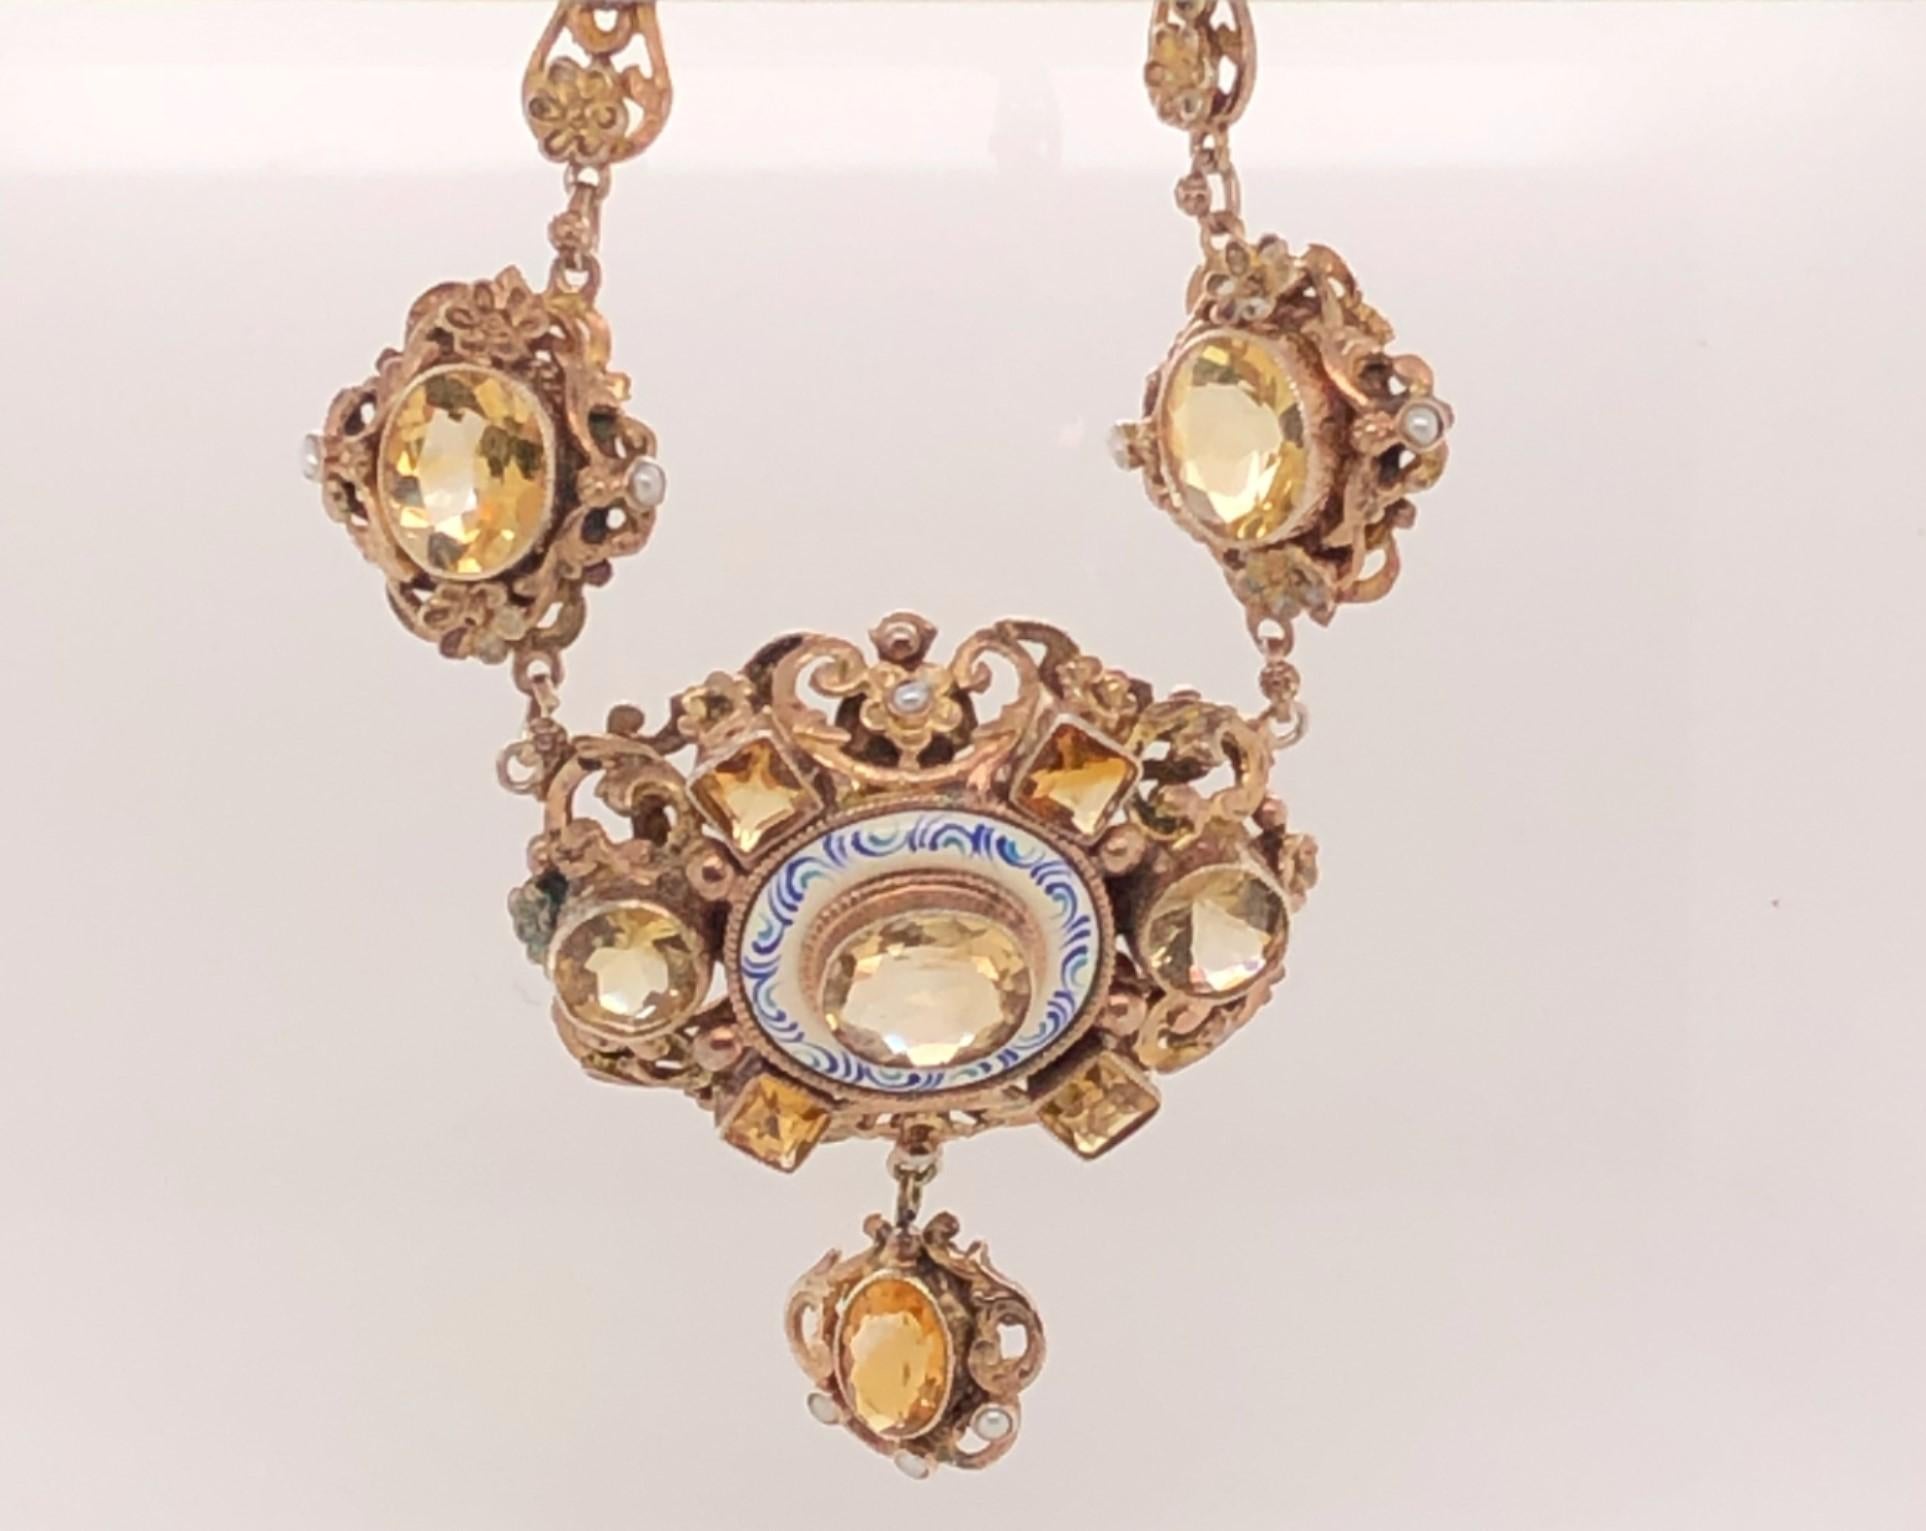 This entire set is being offered together as it is rare to find sets that were not broken up as they were passed down in families. All the items in this set (or parure as they are called) are 10kt yellow gold. The set consists of light and dark